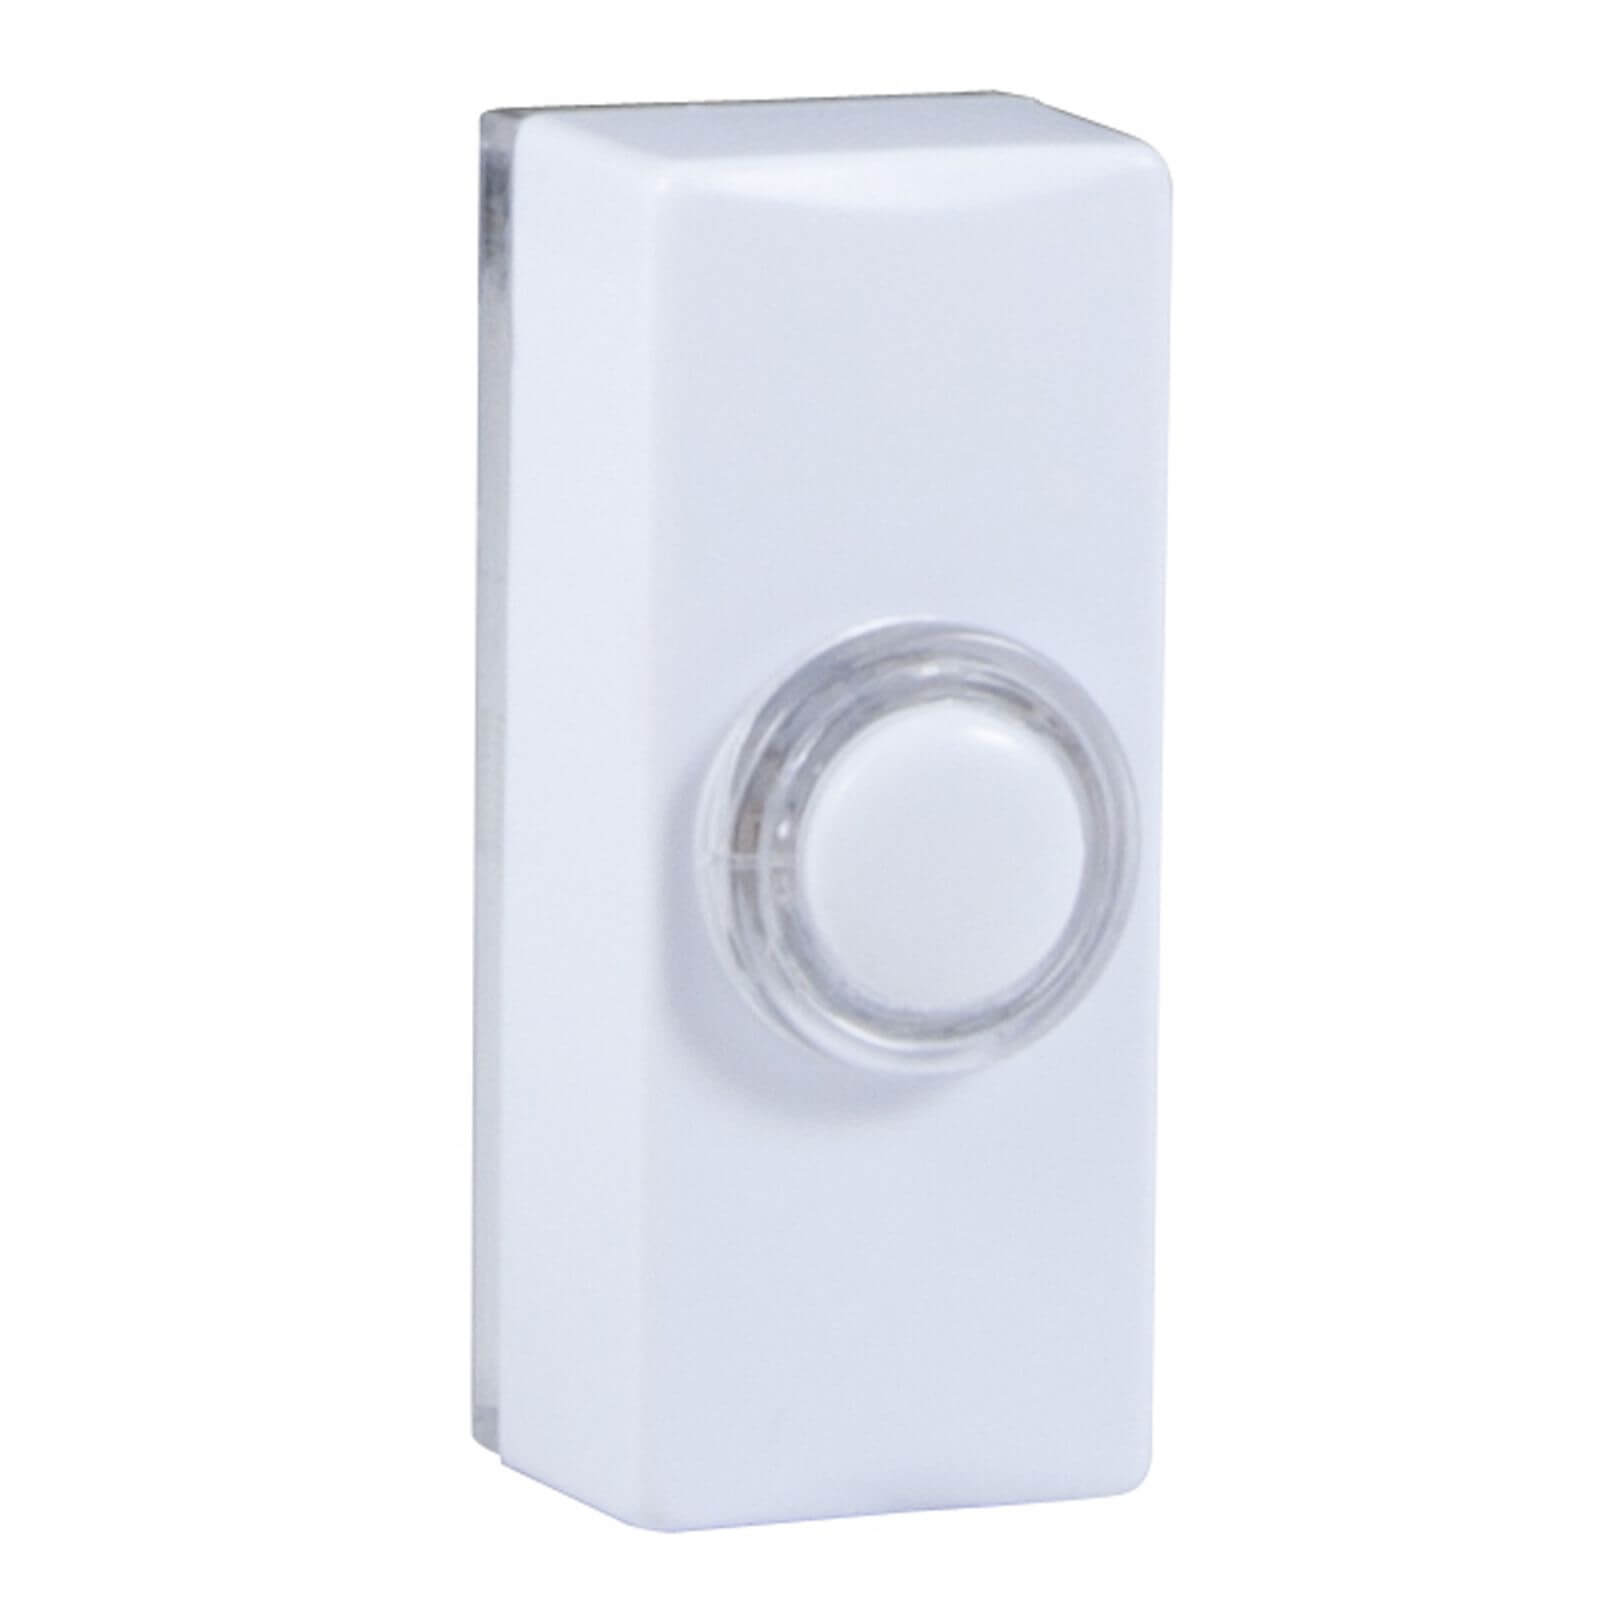 Wired 7730 Lighted Bell Push White